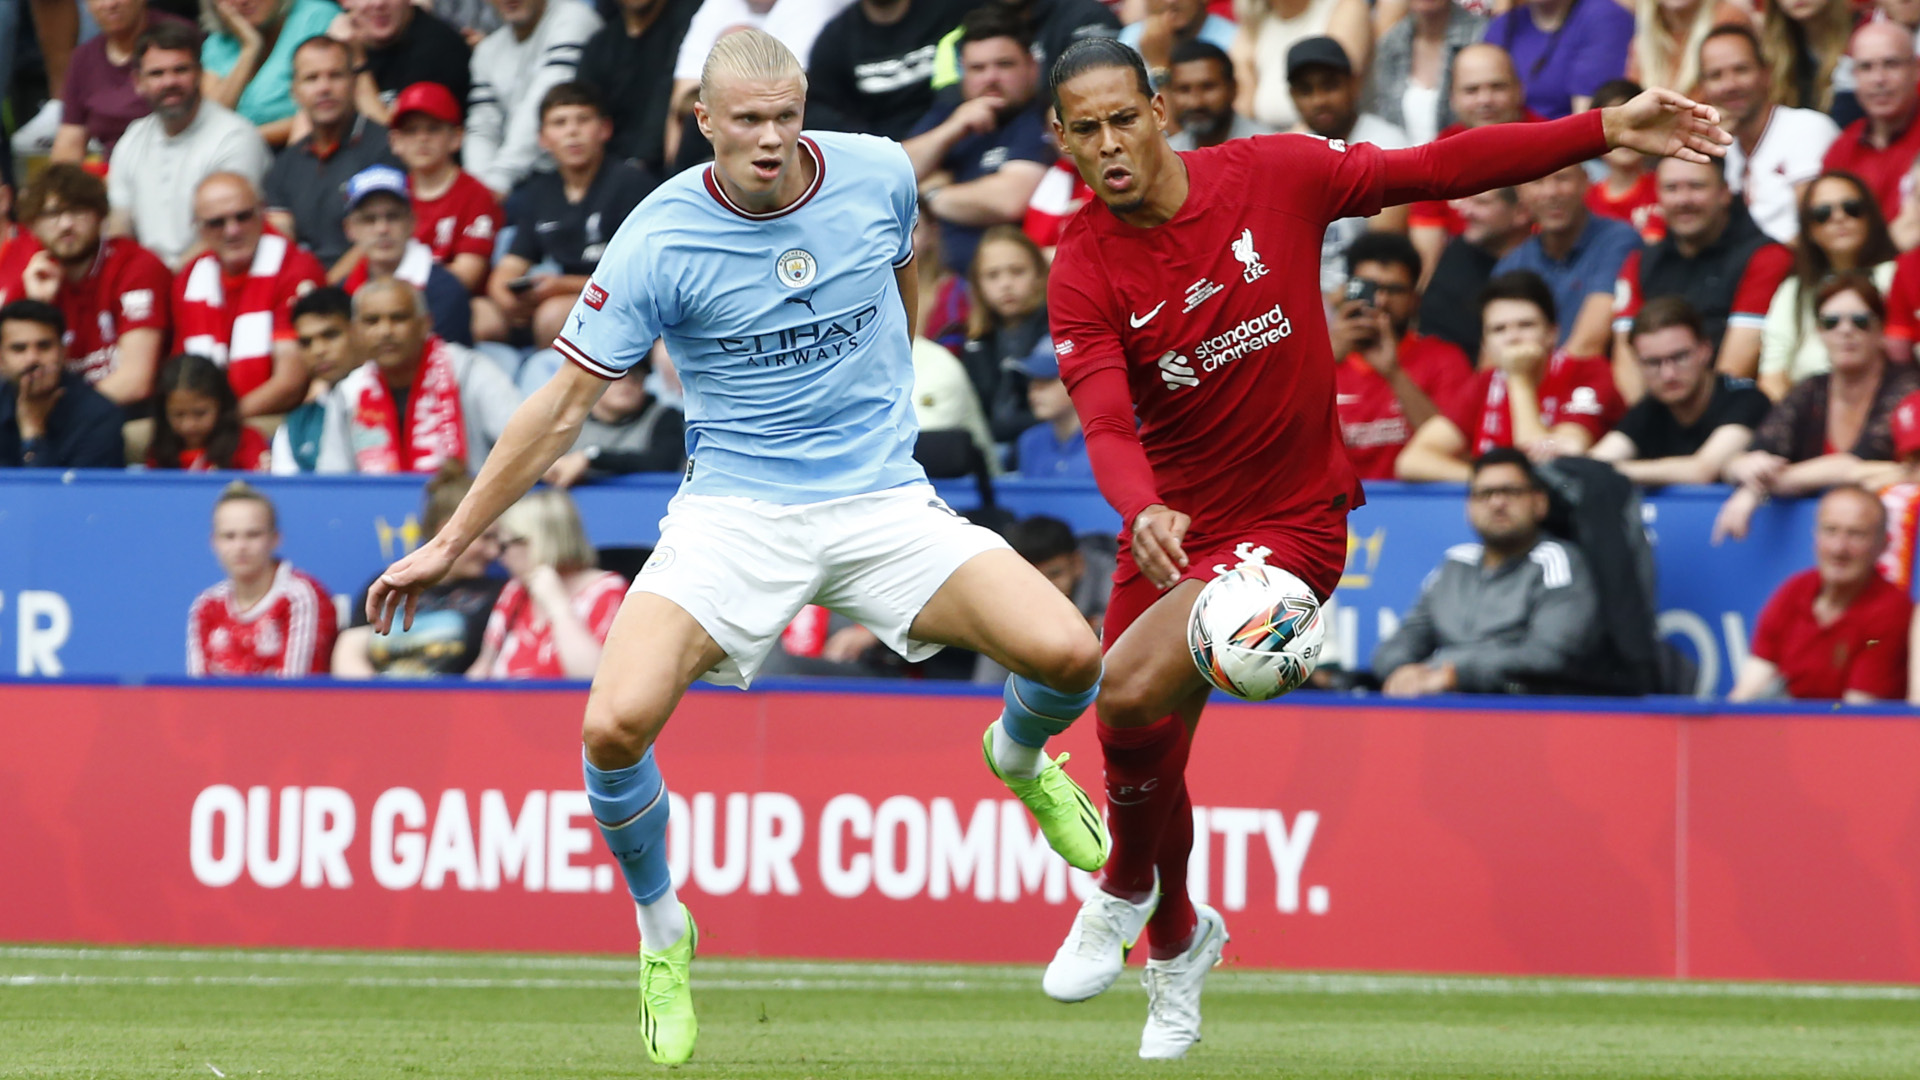 Man City vs Liverpool: How to watch, live stream